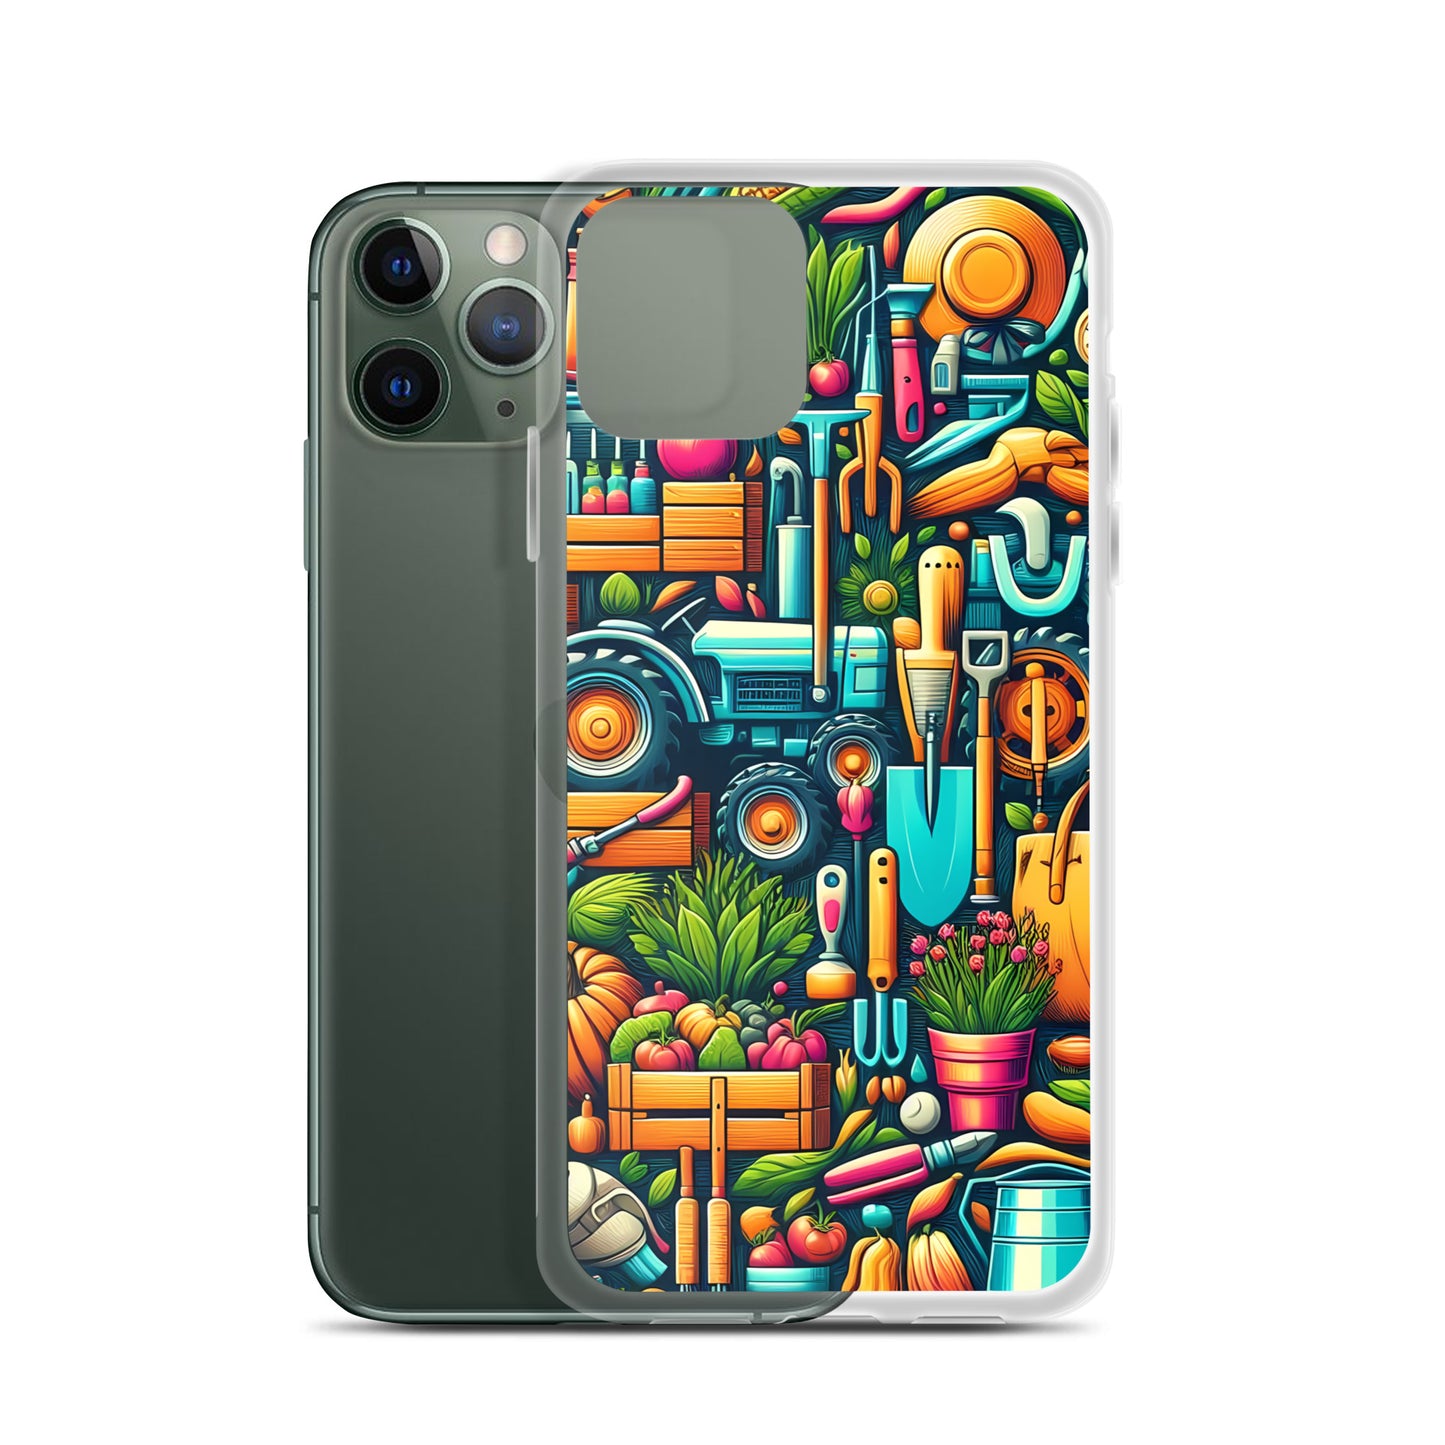 Gardener for iPhone-Clear Case